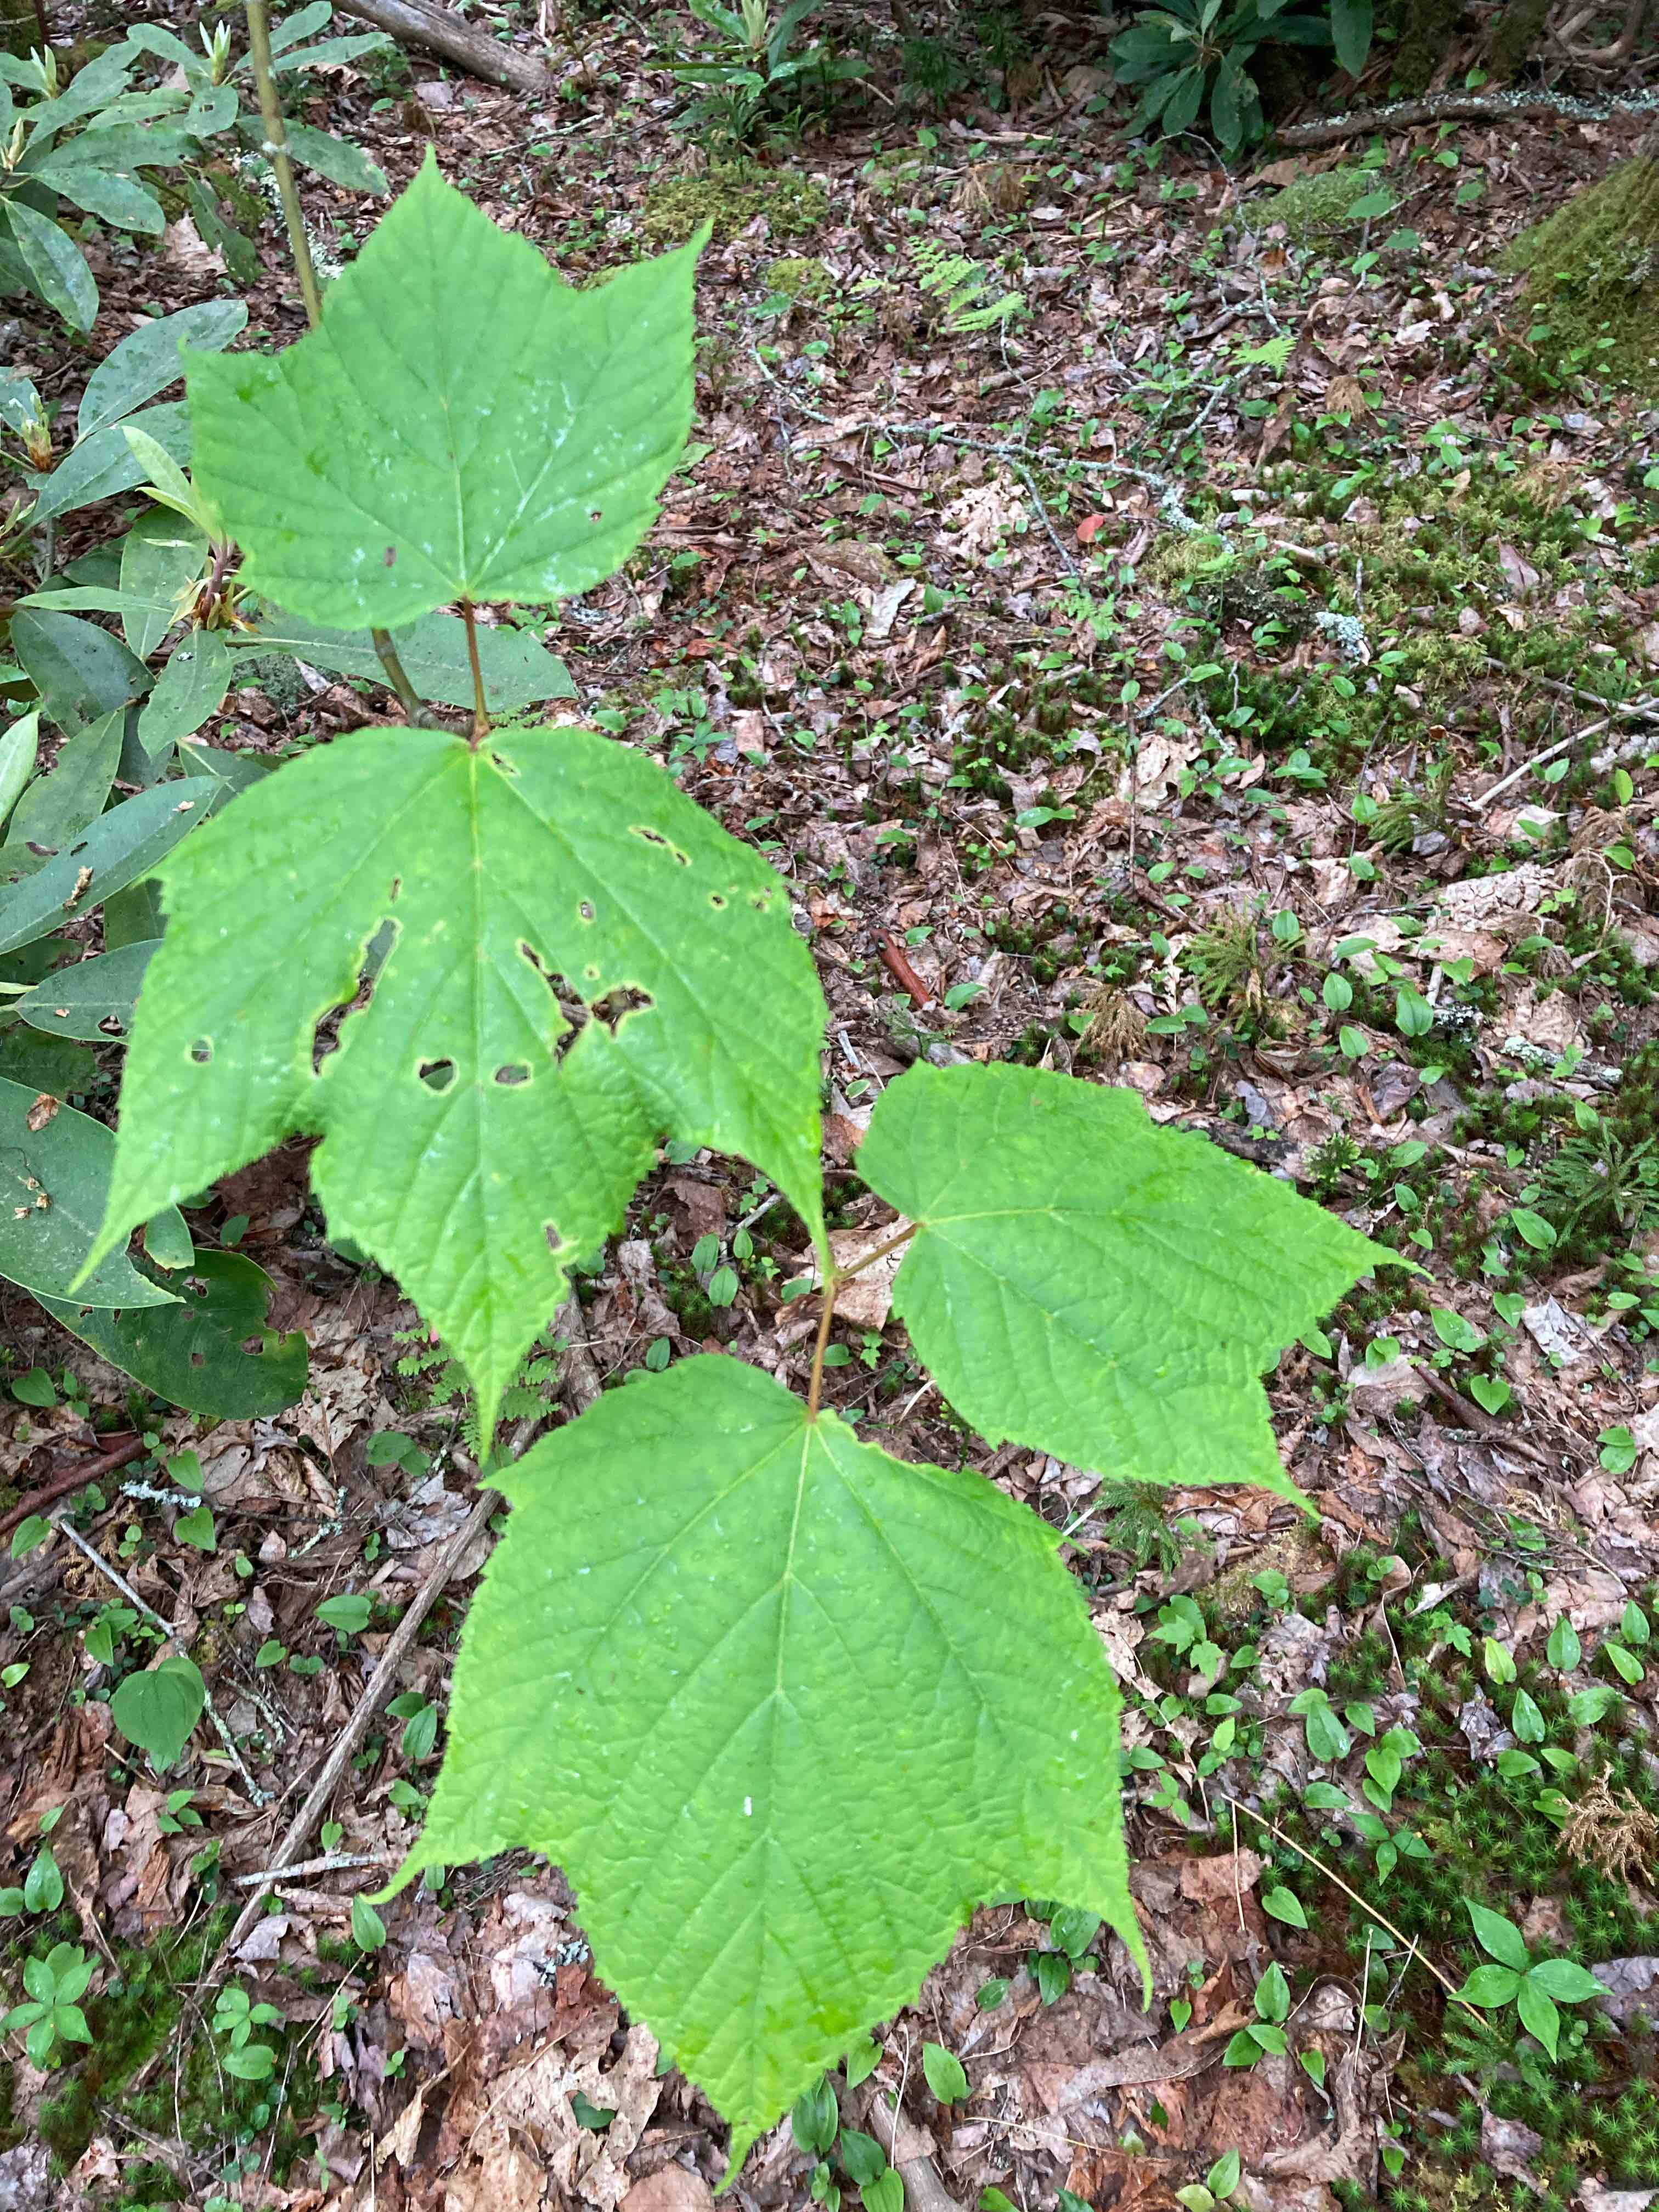 The Scientific Name is Acer pensylvanicum. You will likely hear them called Striped Maple, Moosewood, Whistlewood, Goosefoot Maple. This picture shows the The palmately veined opposite leaves are 5-7 inches long and wide. of Acer pensylvanicum